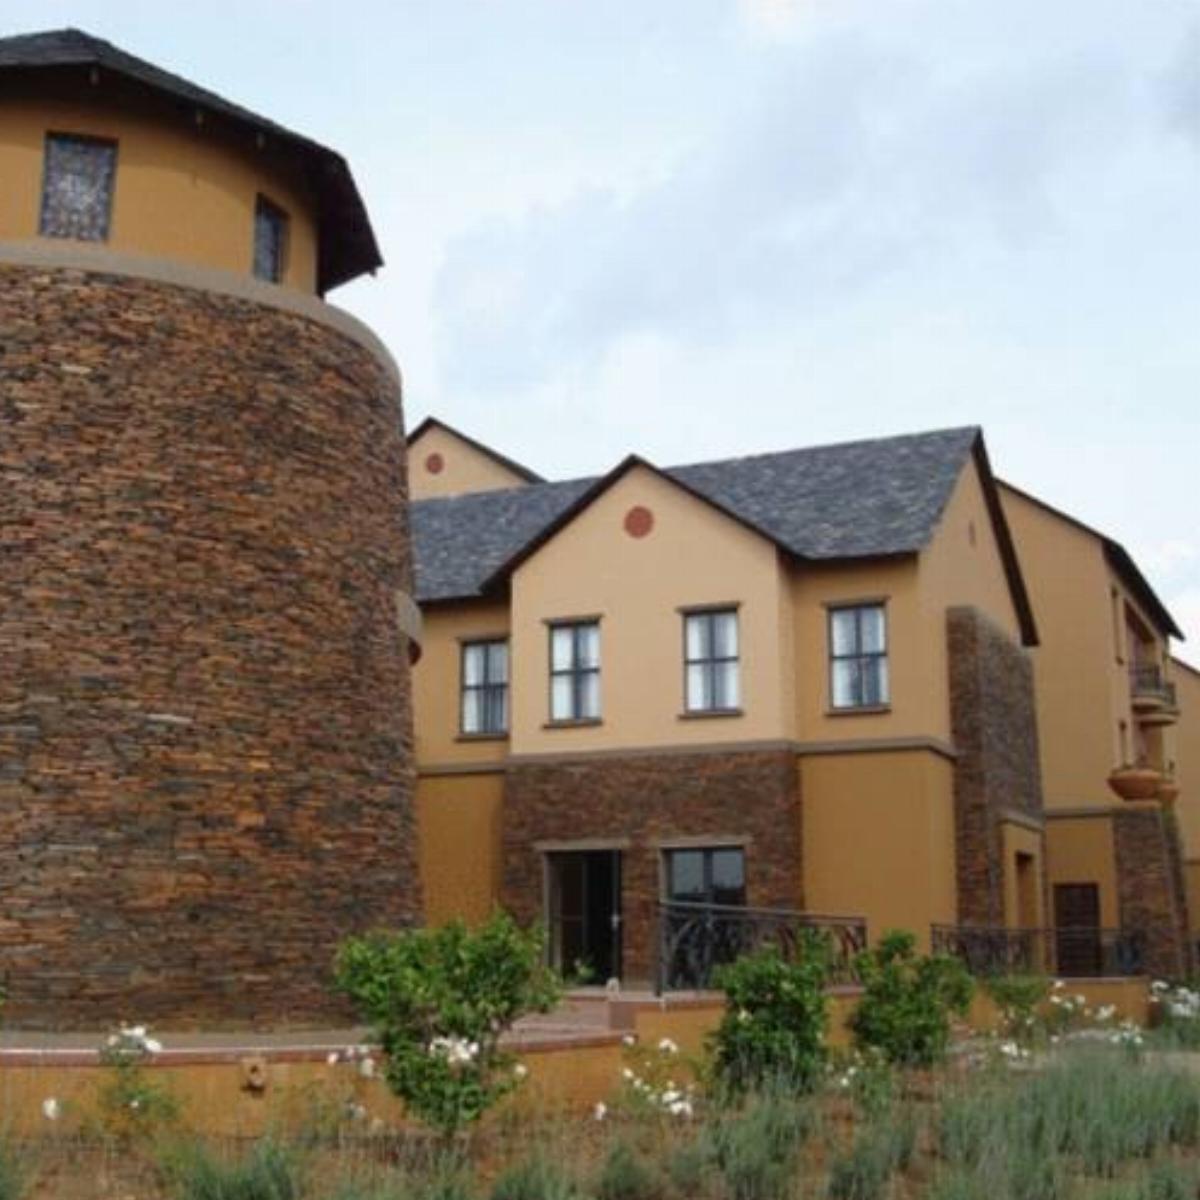 Royal Elephant Hotel & Conference Centre Hotel Centurion South Africa